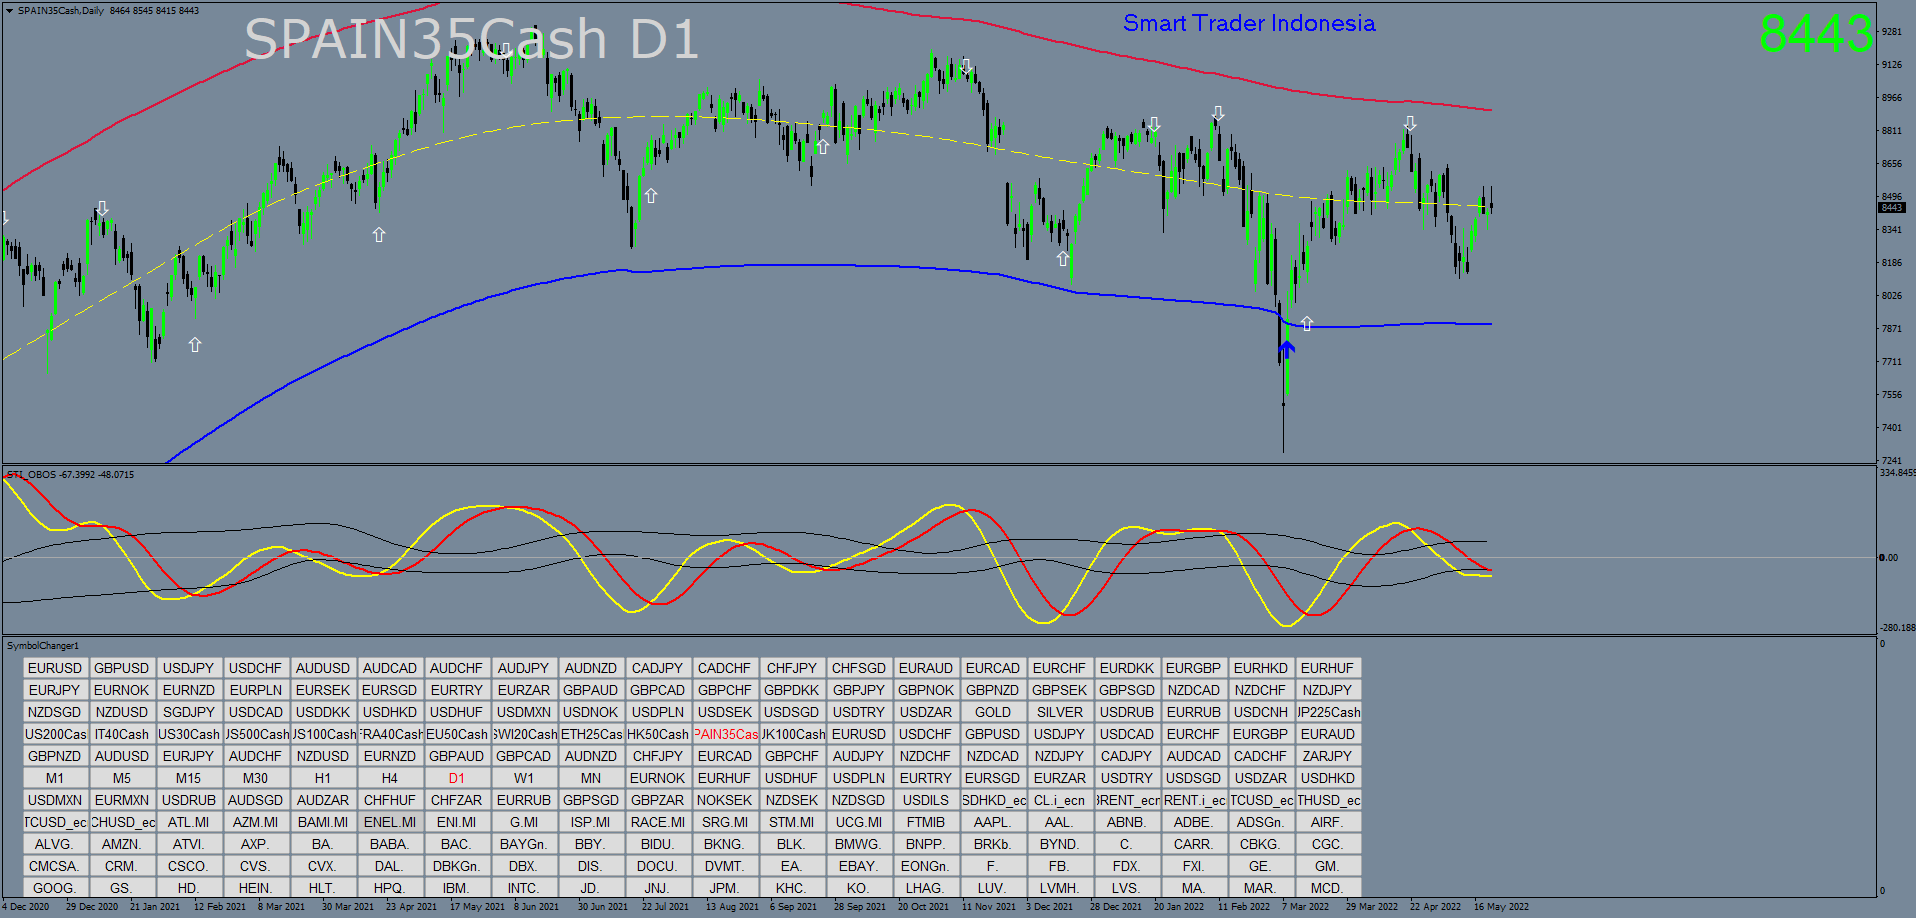 spain35cash-d1-trading-point-of (9).png